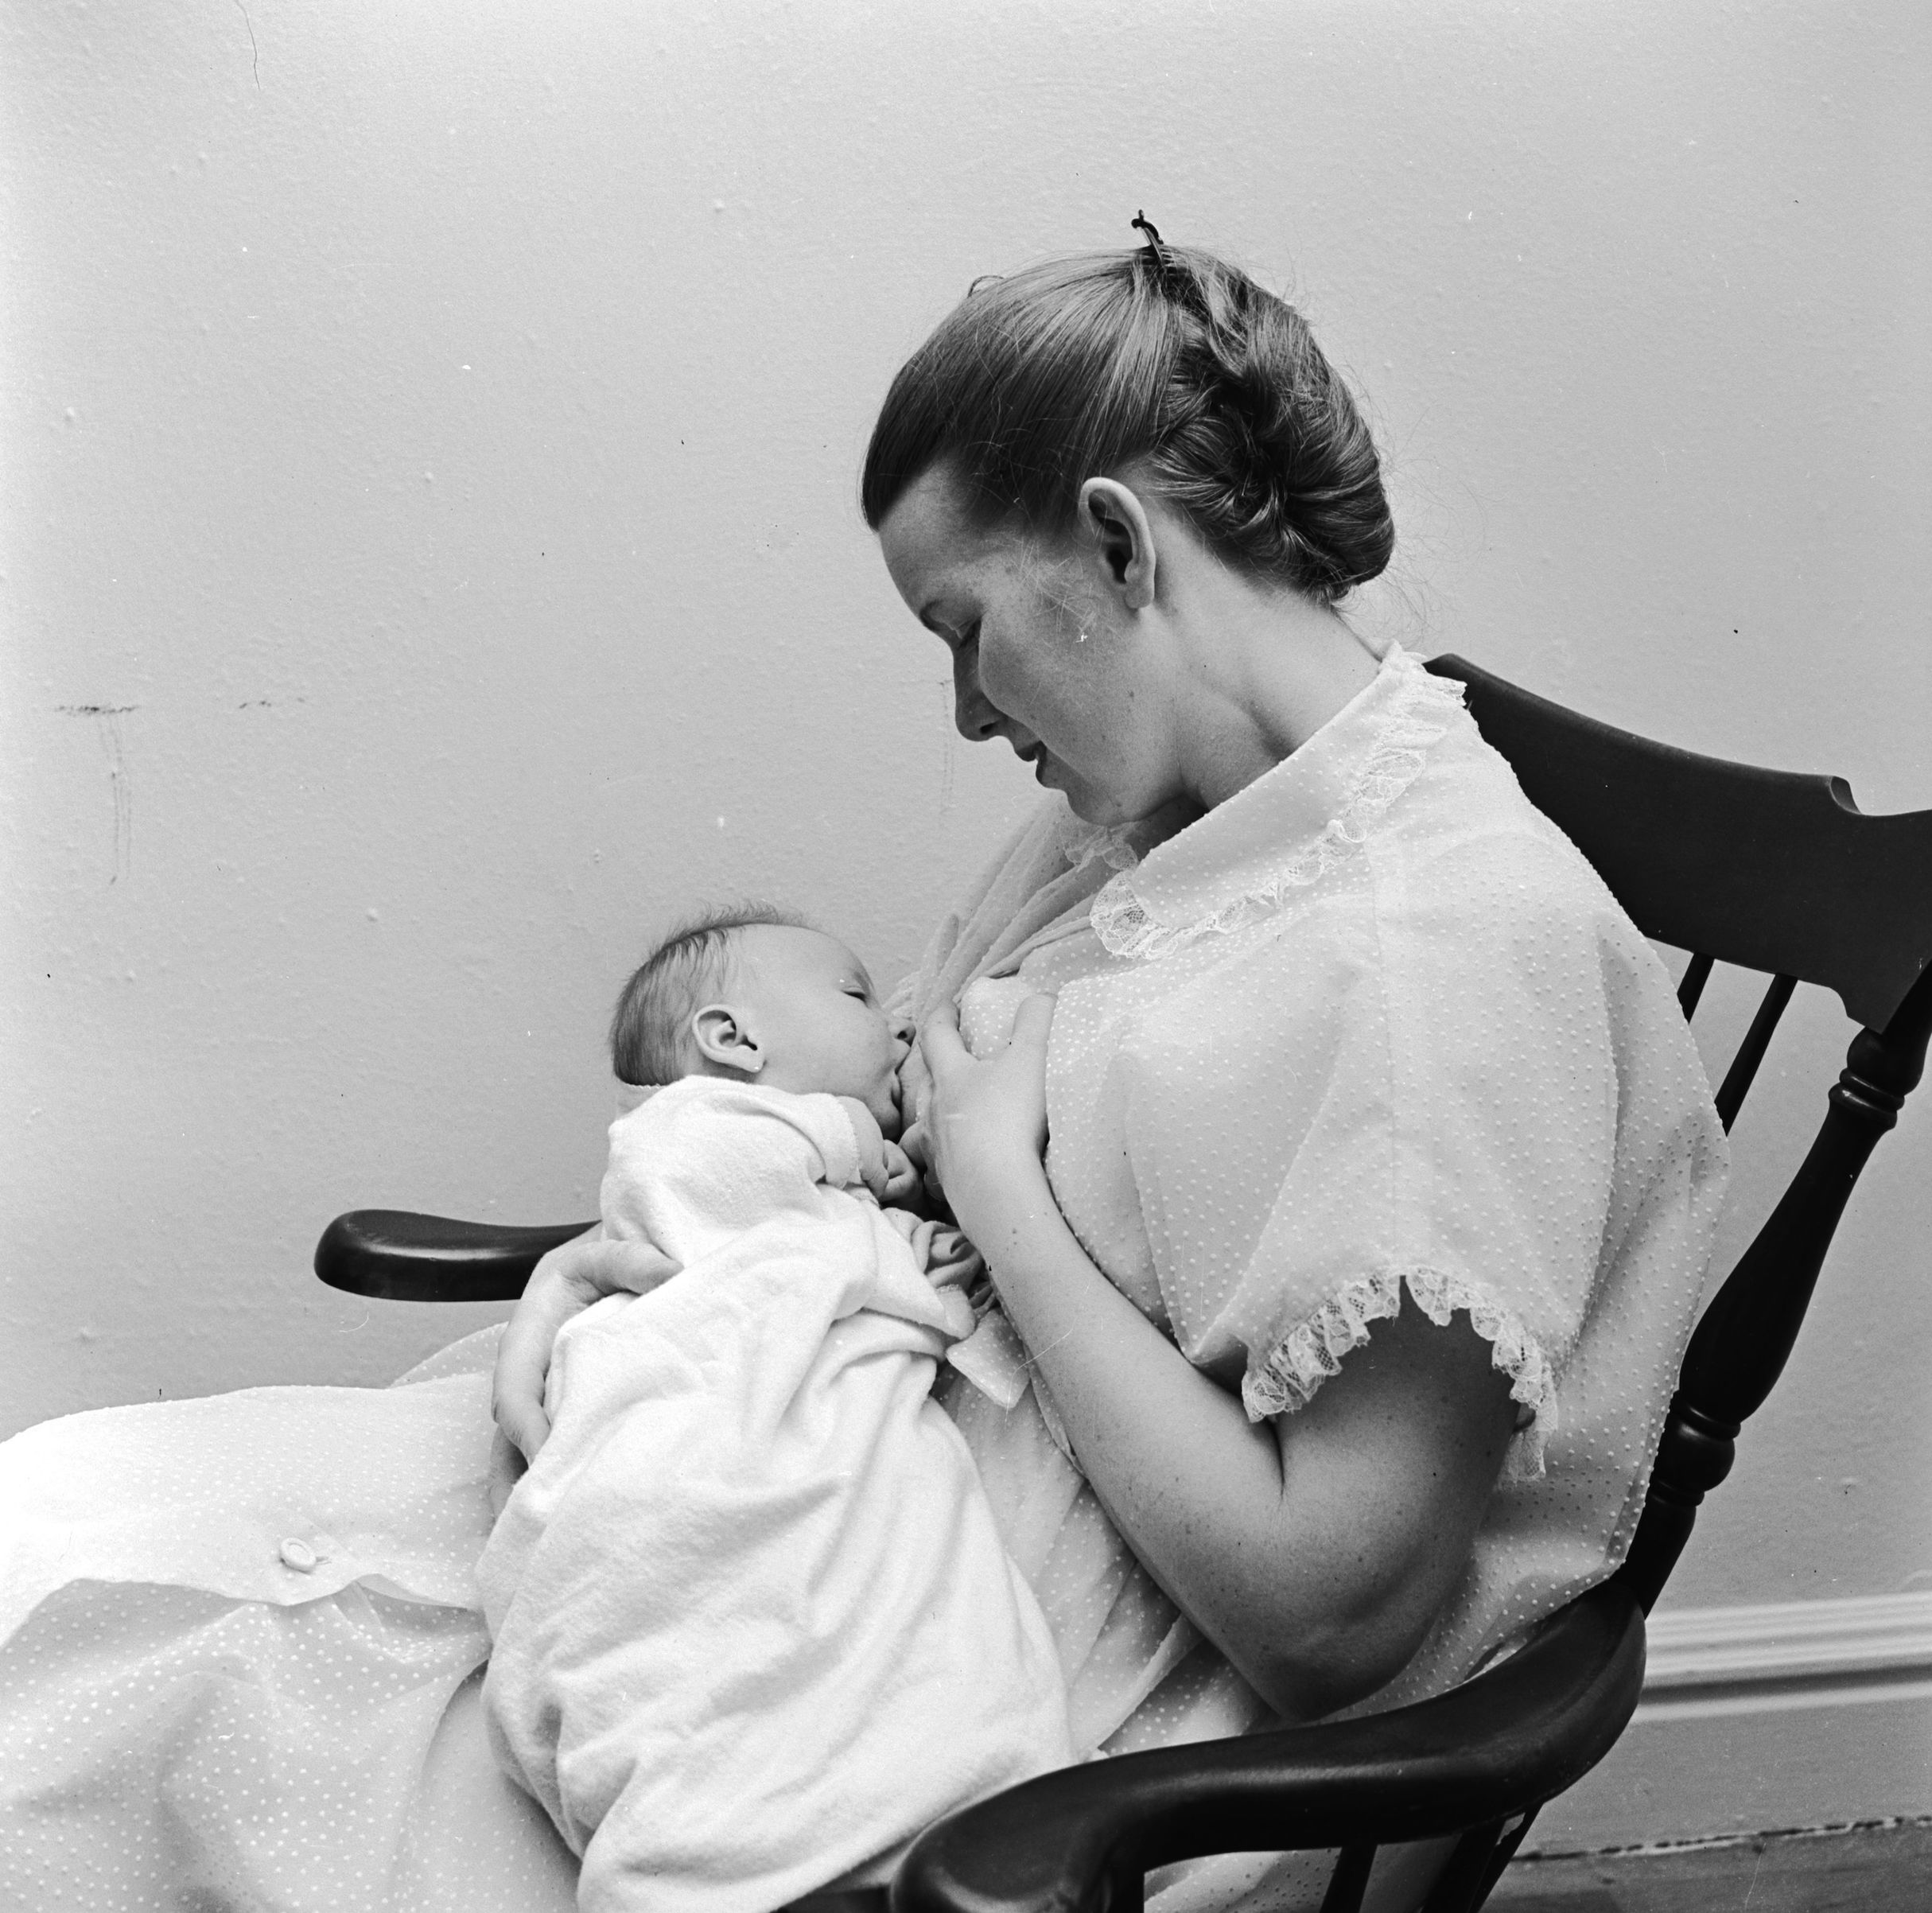 circa 1950:  A woman sitting in a chair breastfeeding her baby. (Three Lions/Getty Images)